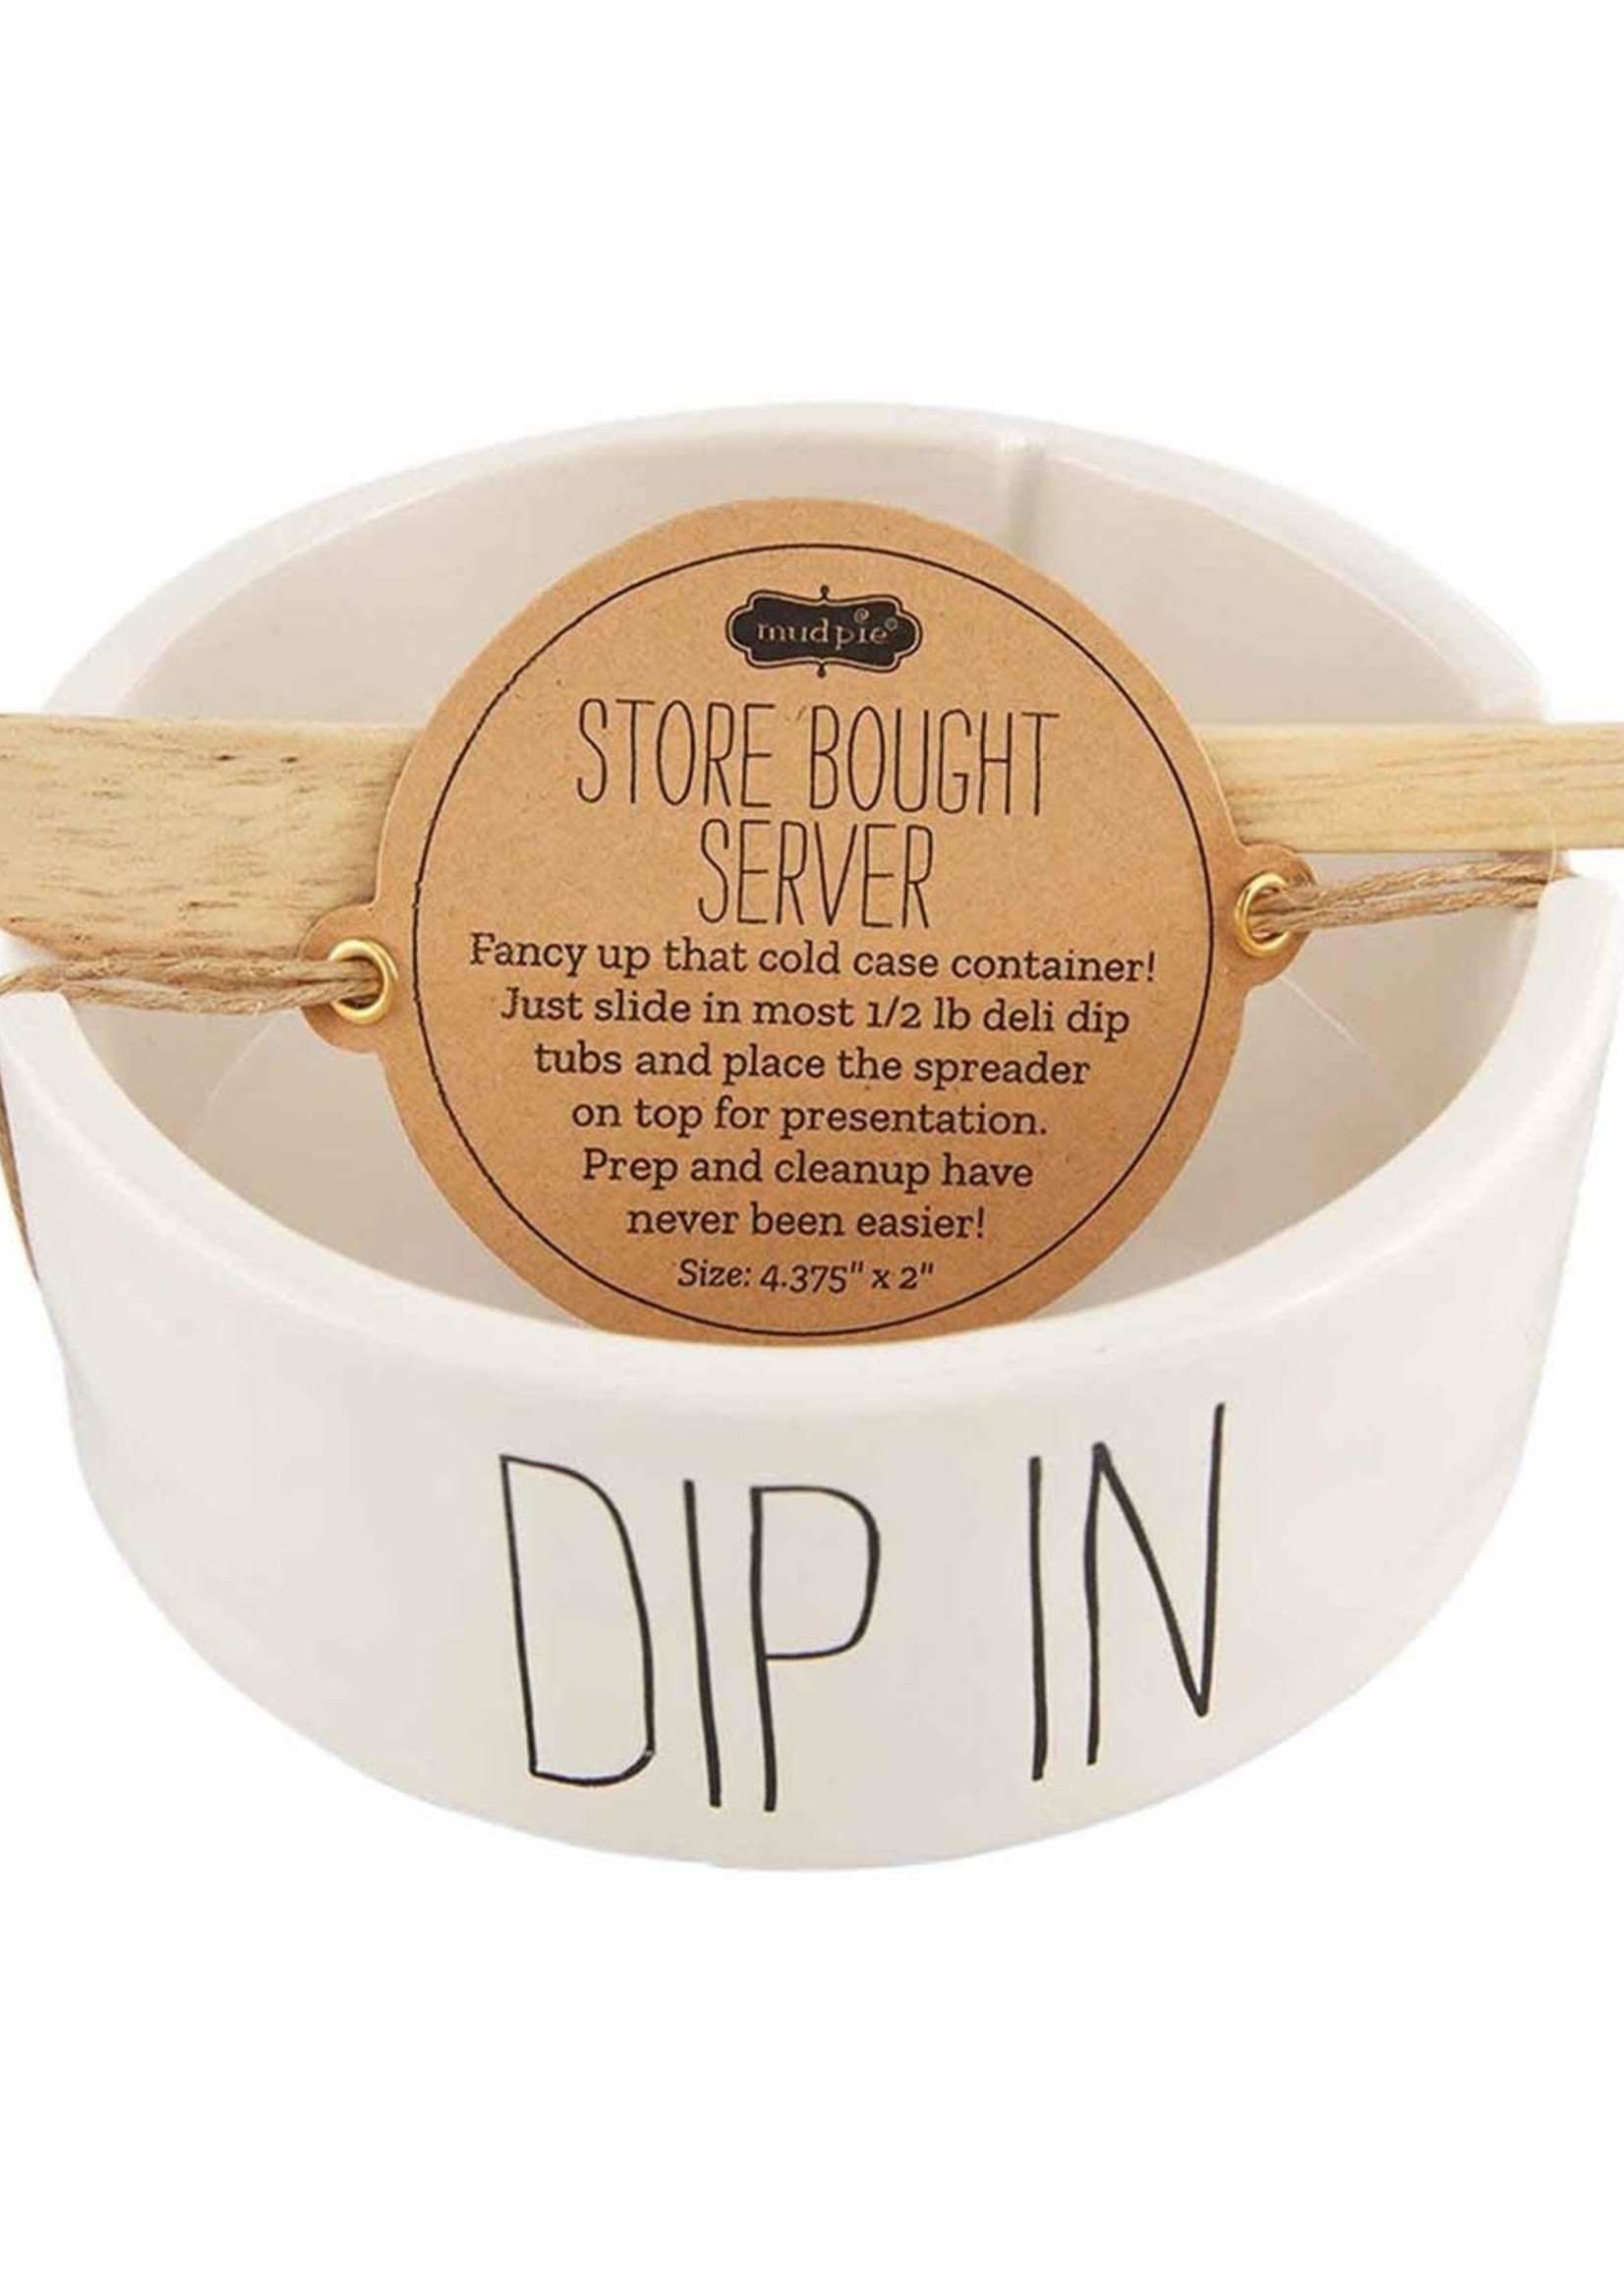 Mudpie Store Bought Container Dish